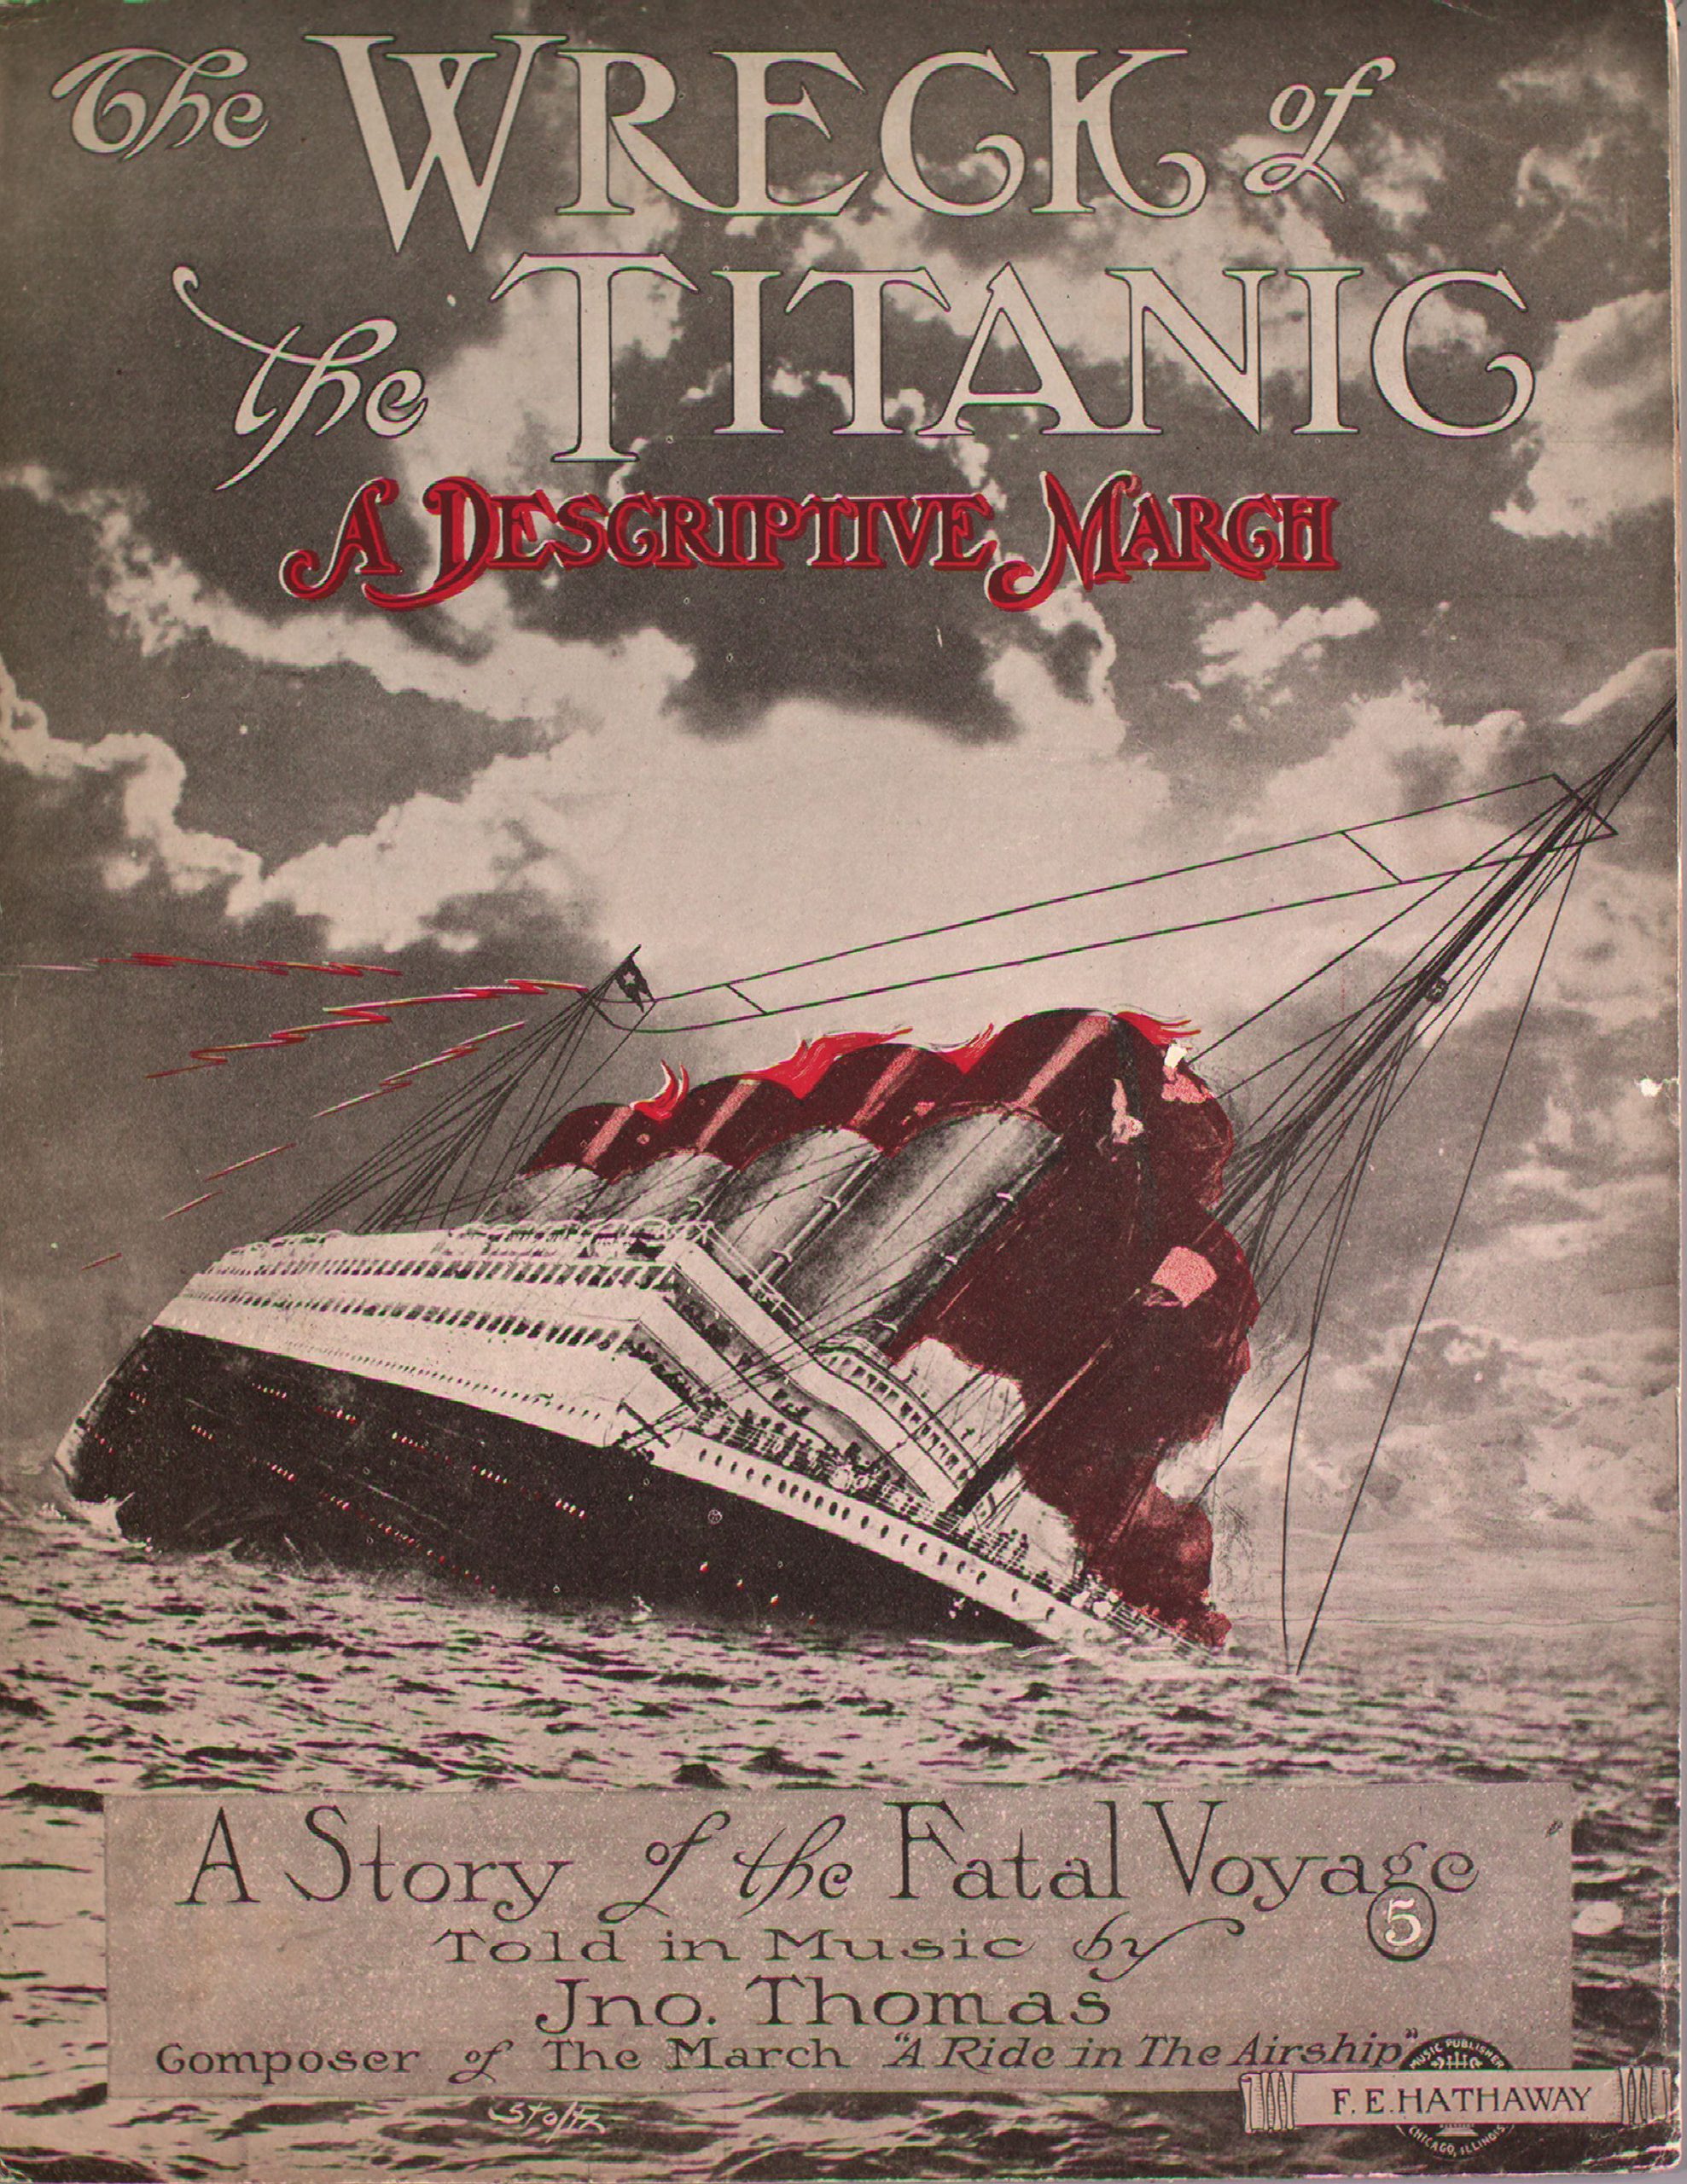 Titanic disaster  Library of Congress